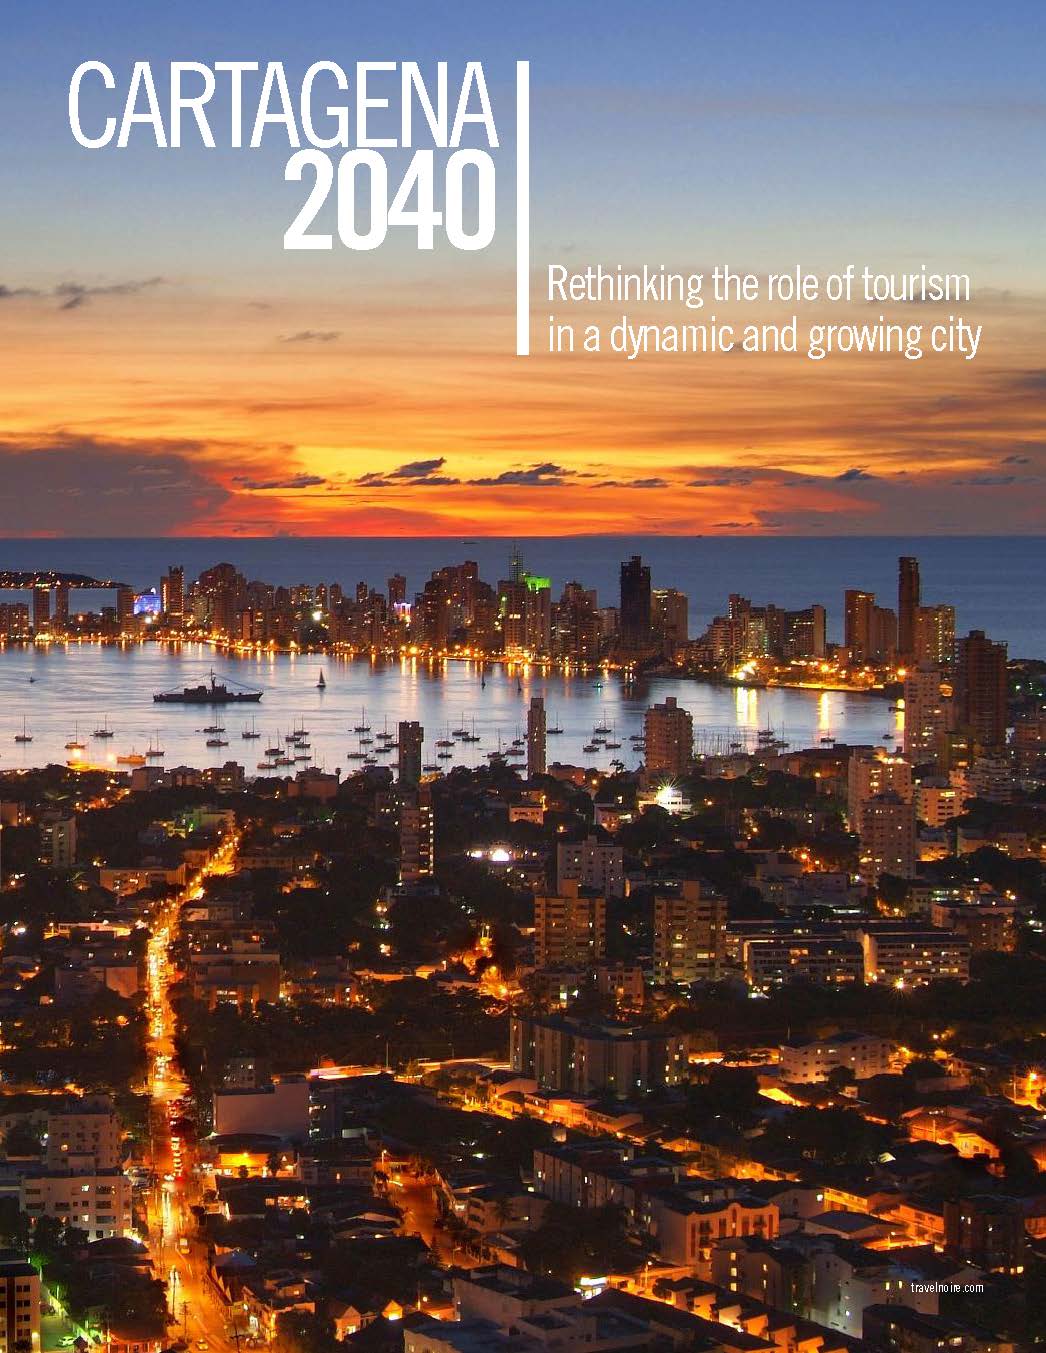 Cartagena 2040| Rethinking the role of tourism in a dynamic and growing city